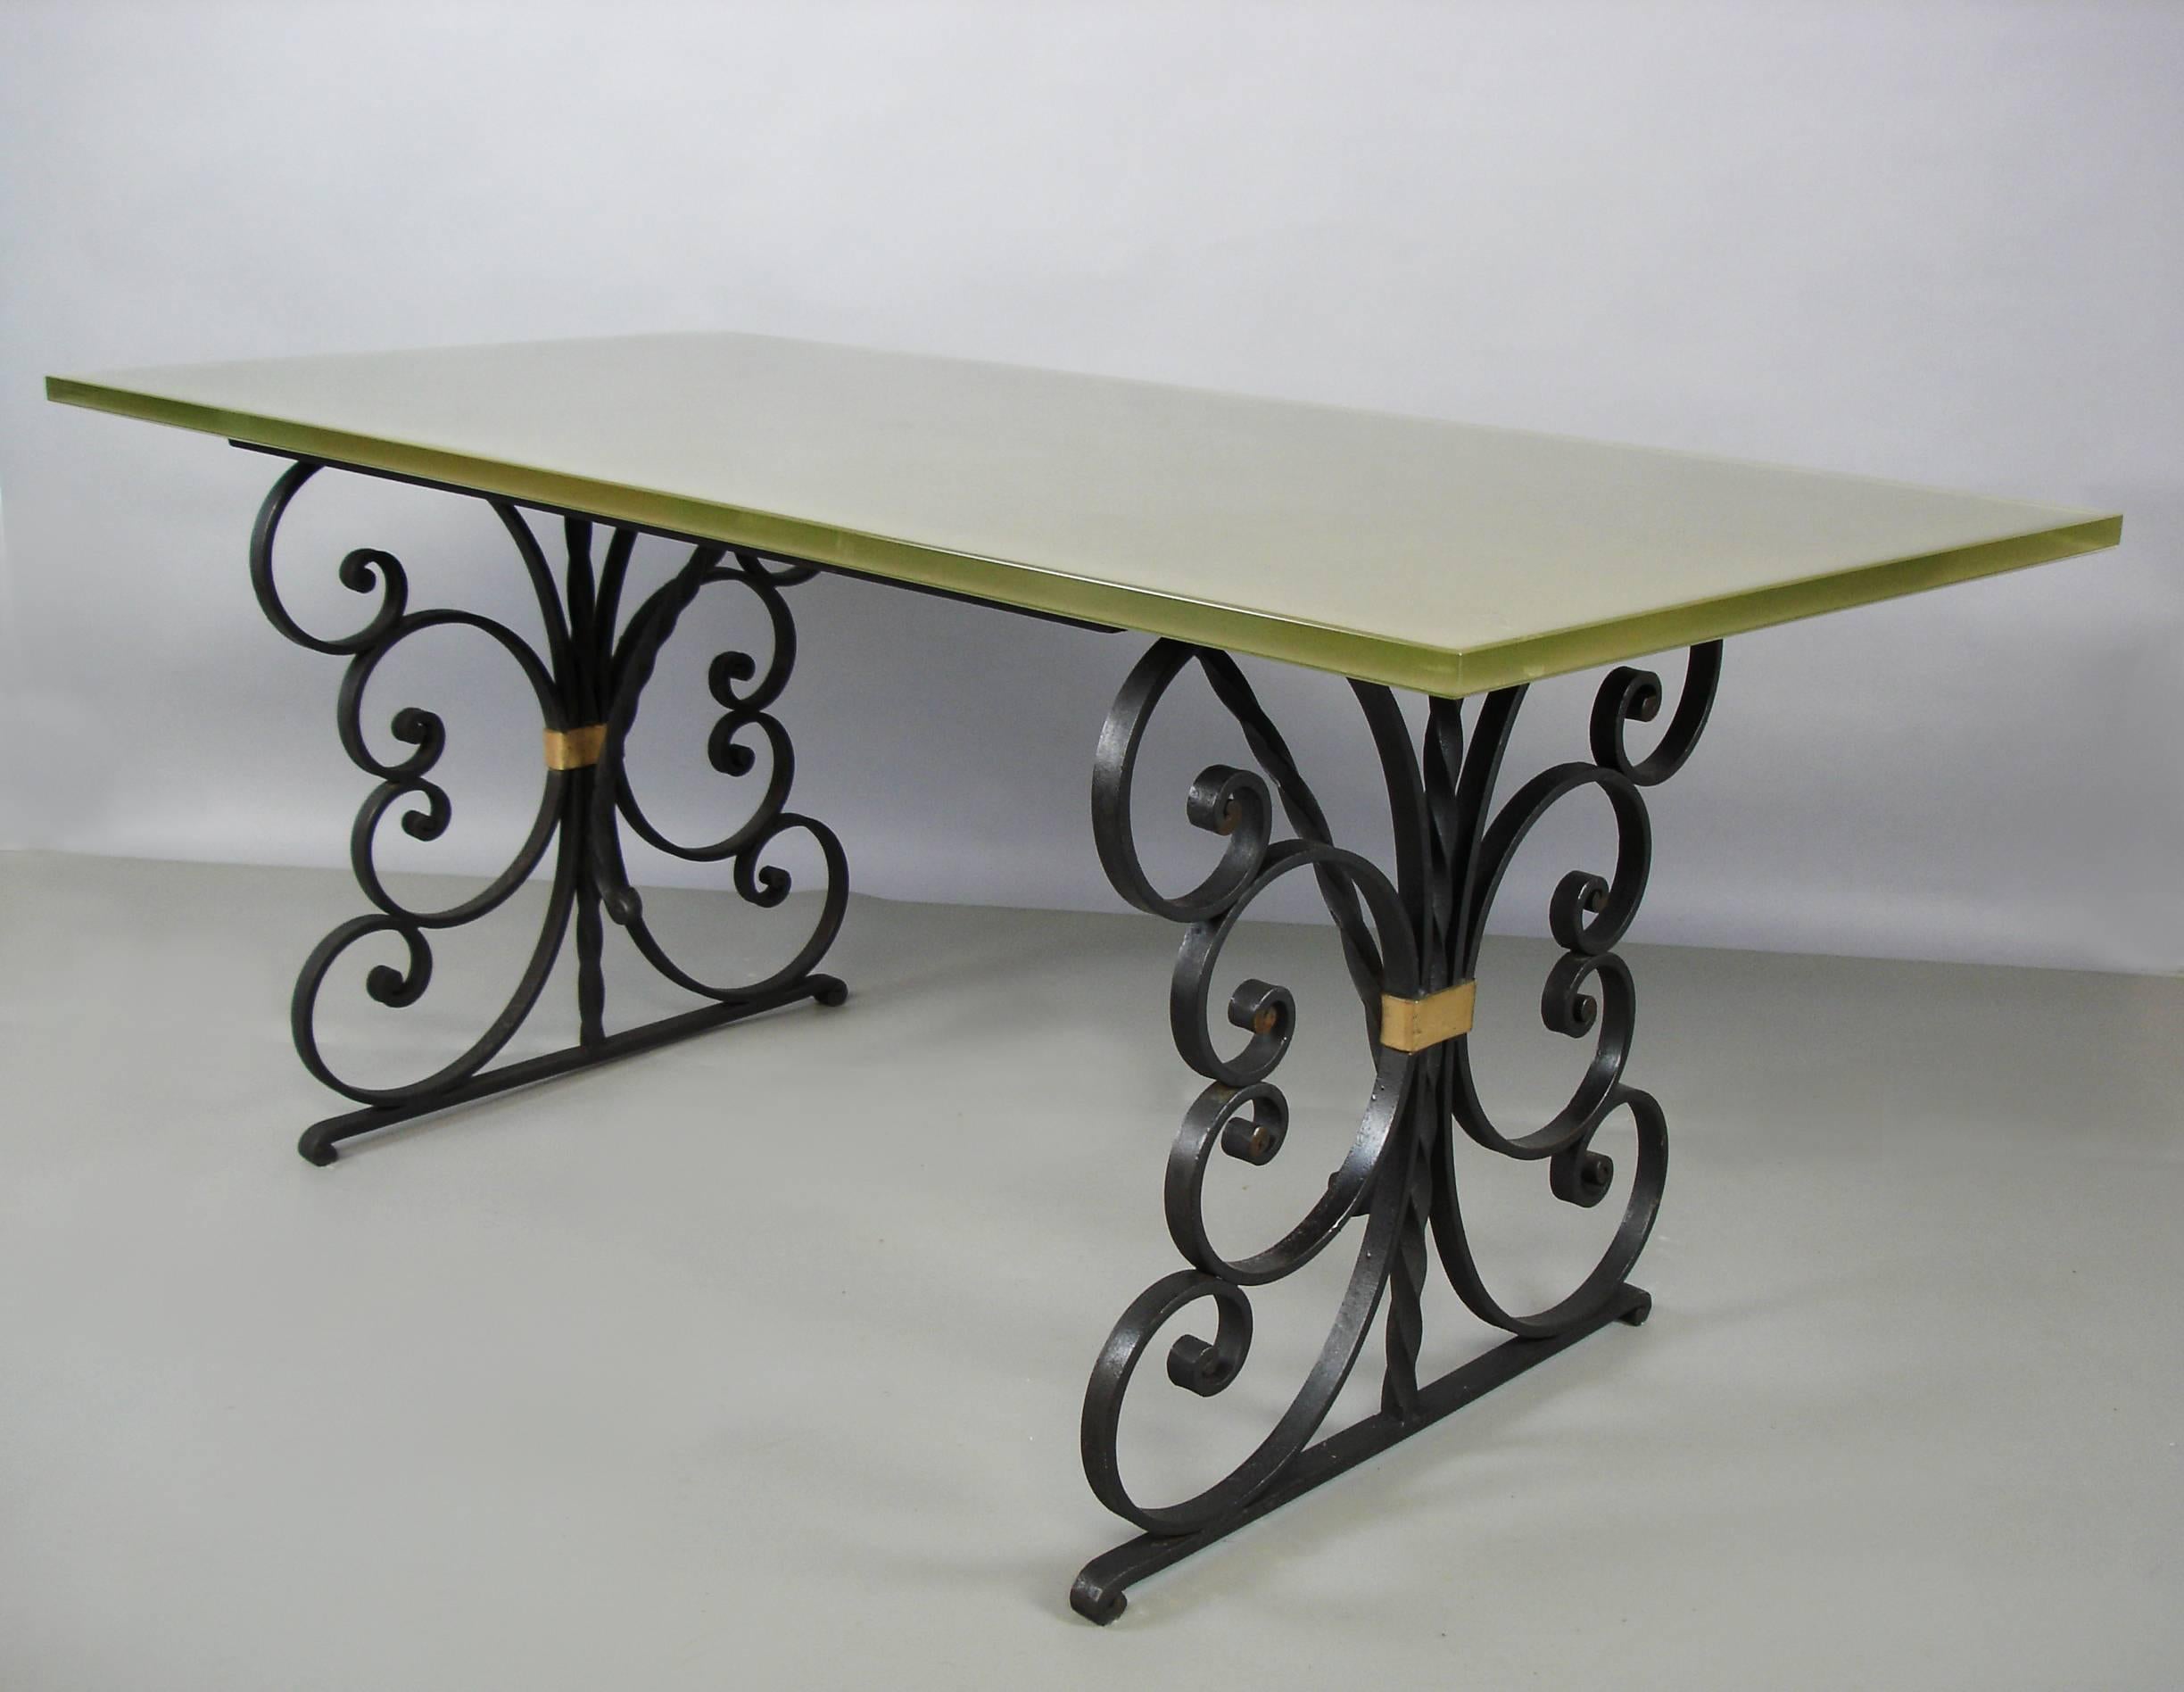 A black painted and gilt wrought iron structure supporting a glass top. The glass is sand blasted and silvered, underneath, this give a green-gray aquatic color to the top.